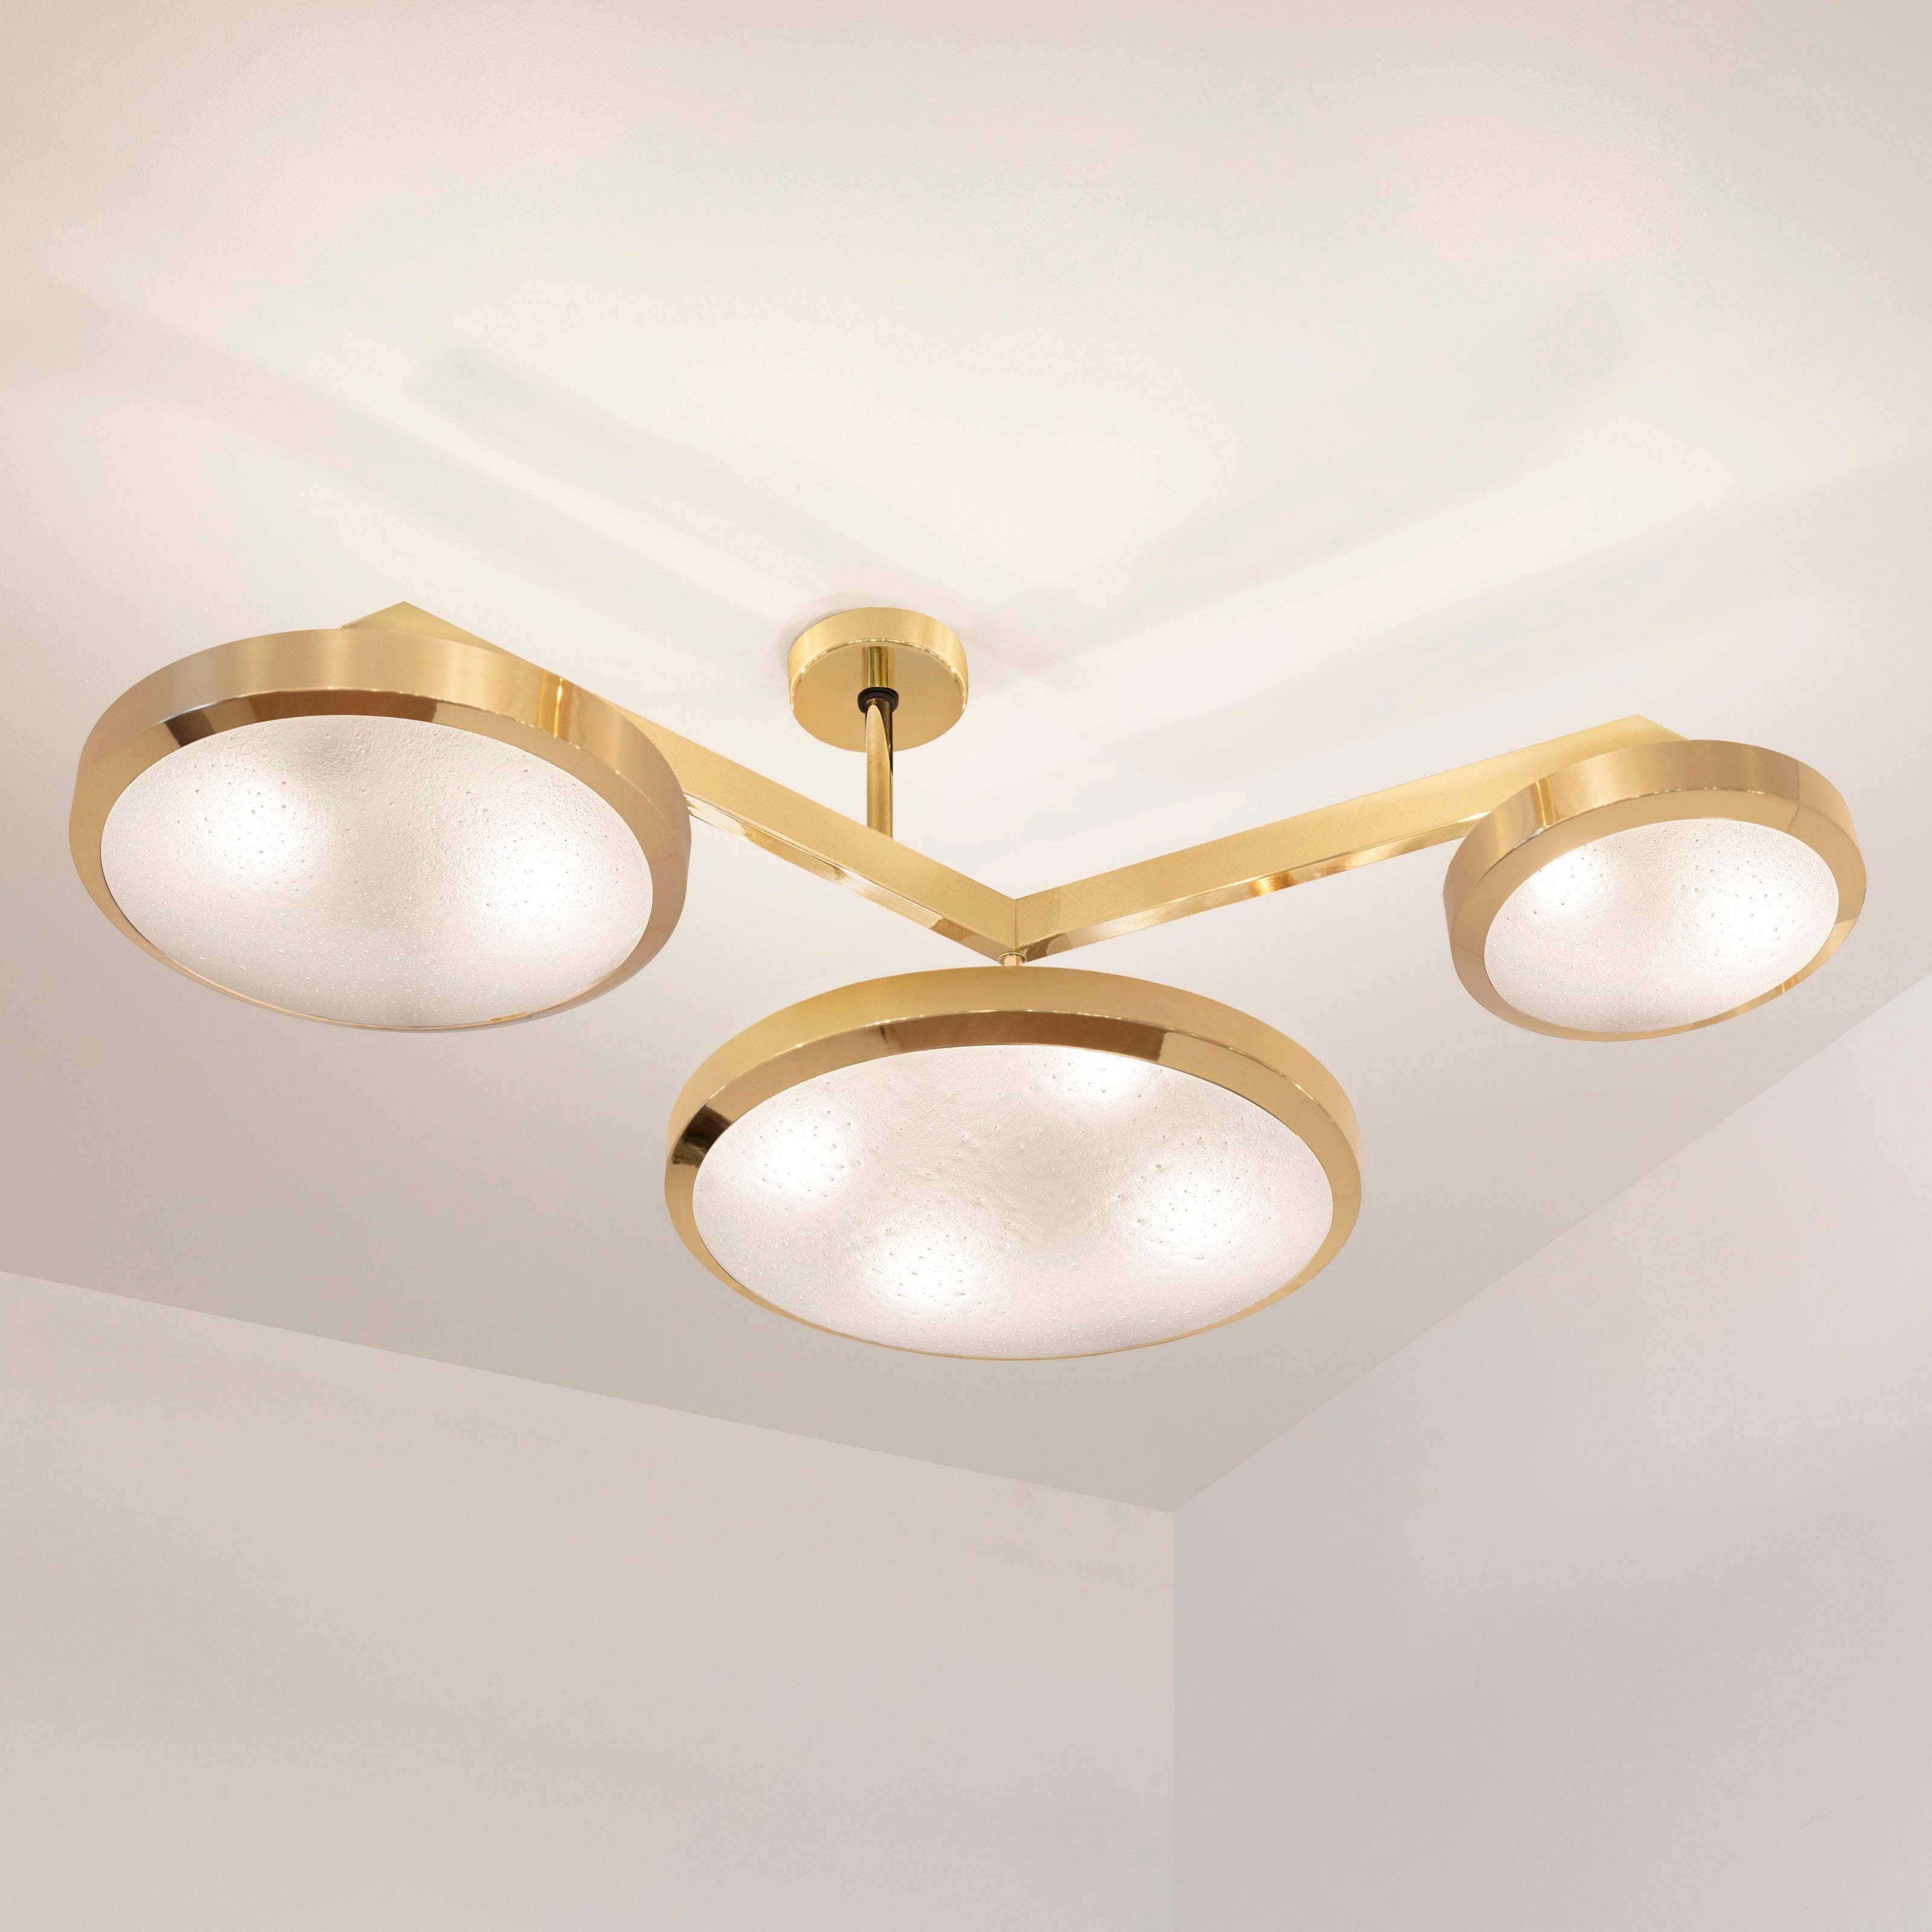 Contemporary Zeta Ceiling Light by Gaspare Asaro- Two Tone Finish For Sale